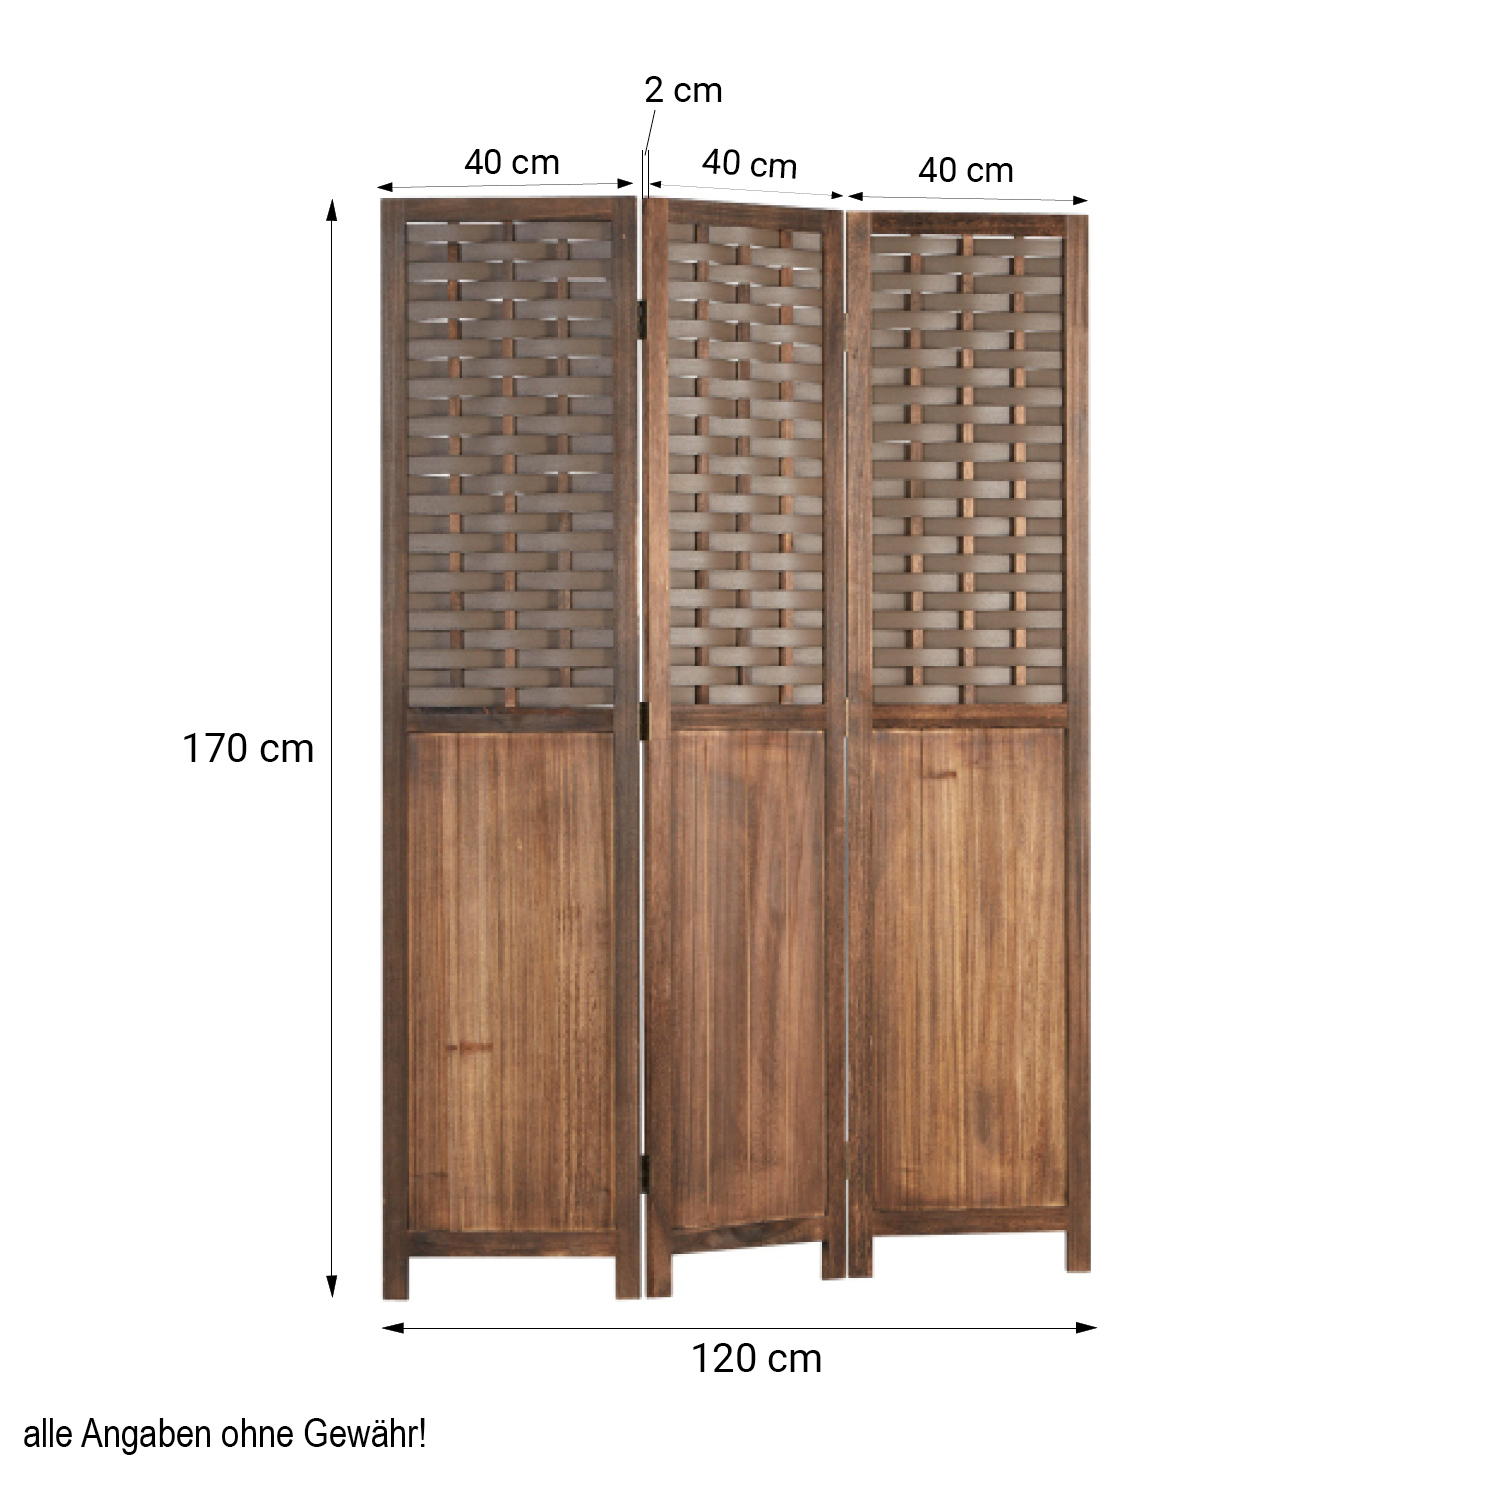 Paravent Room Divider 3 Parts Wood Partition Rattan Optics Privacy Screen Brown White Black Nature